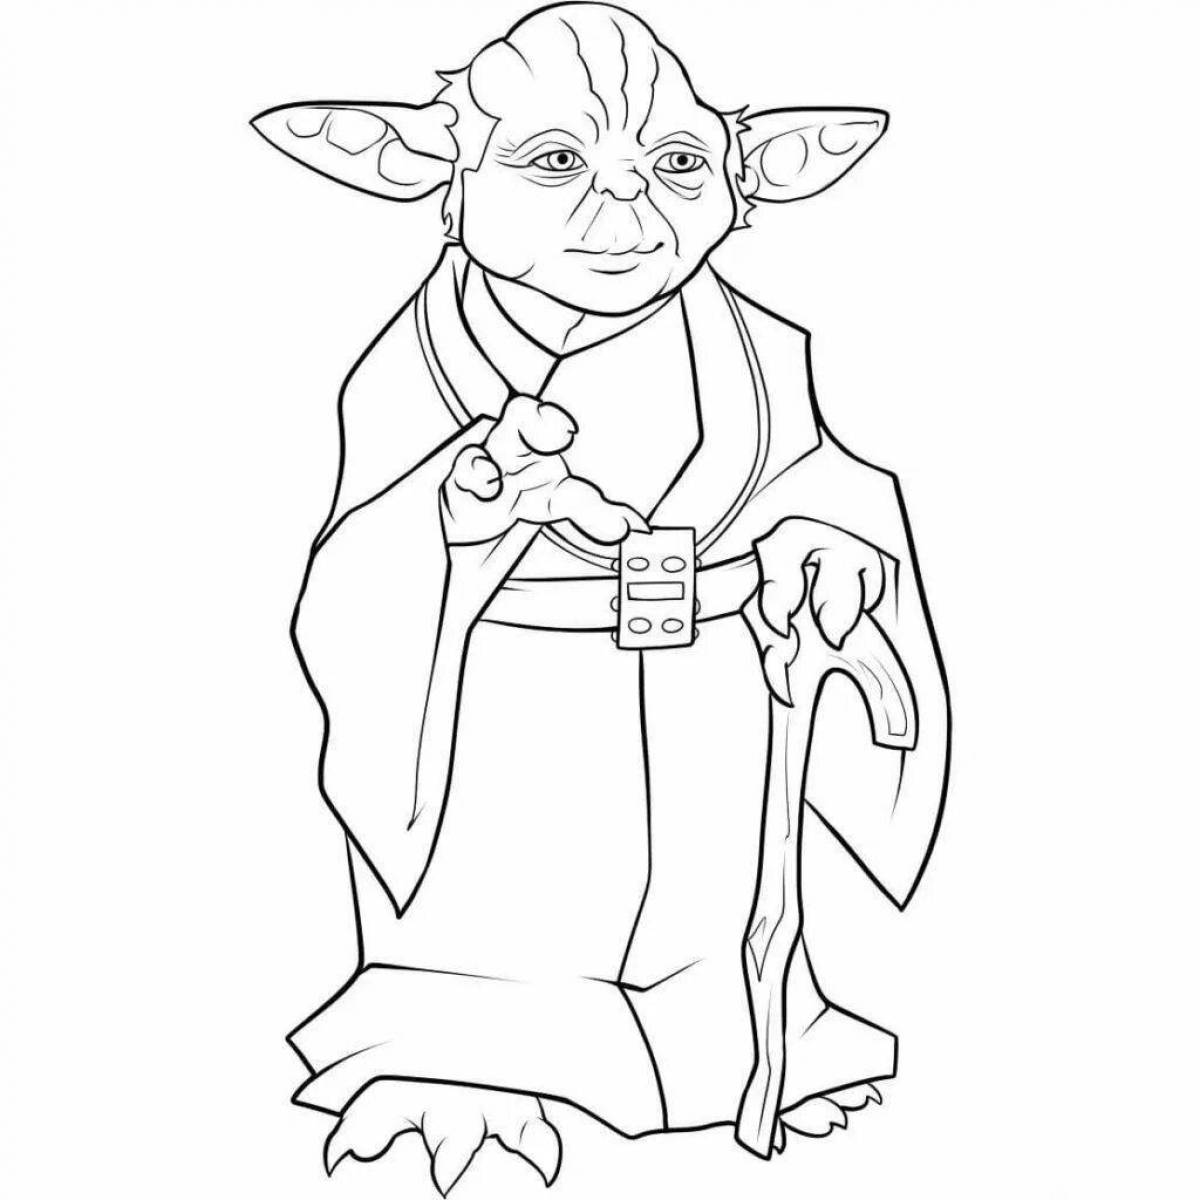 Playful star wars food coloring page